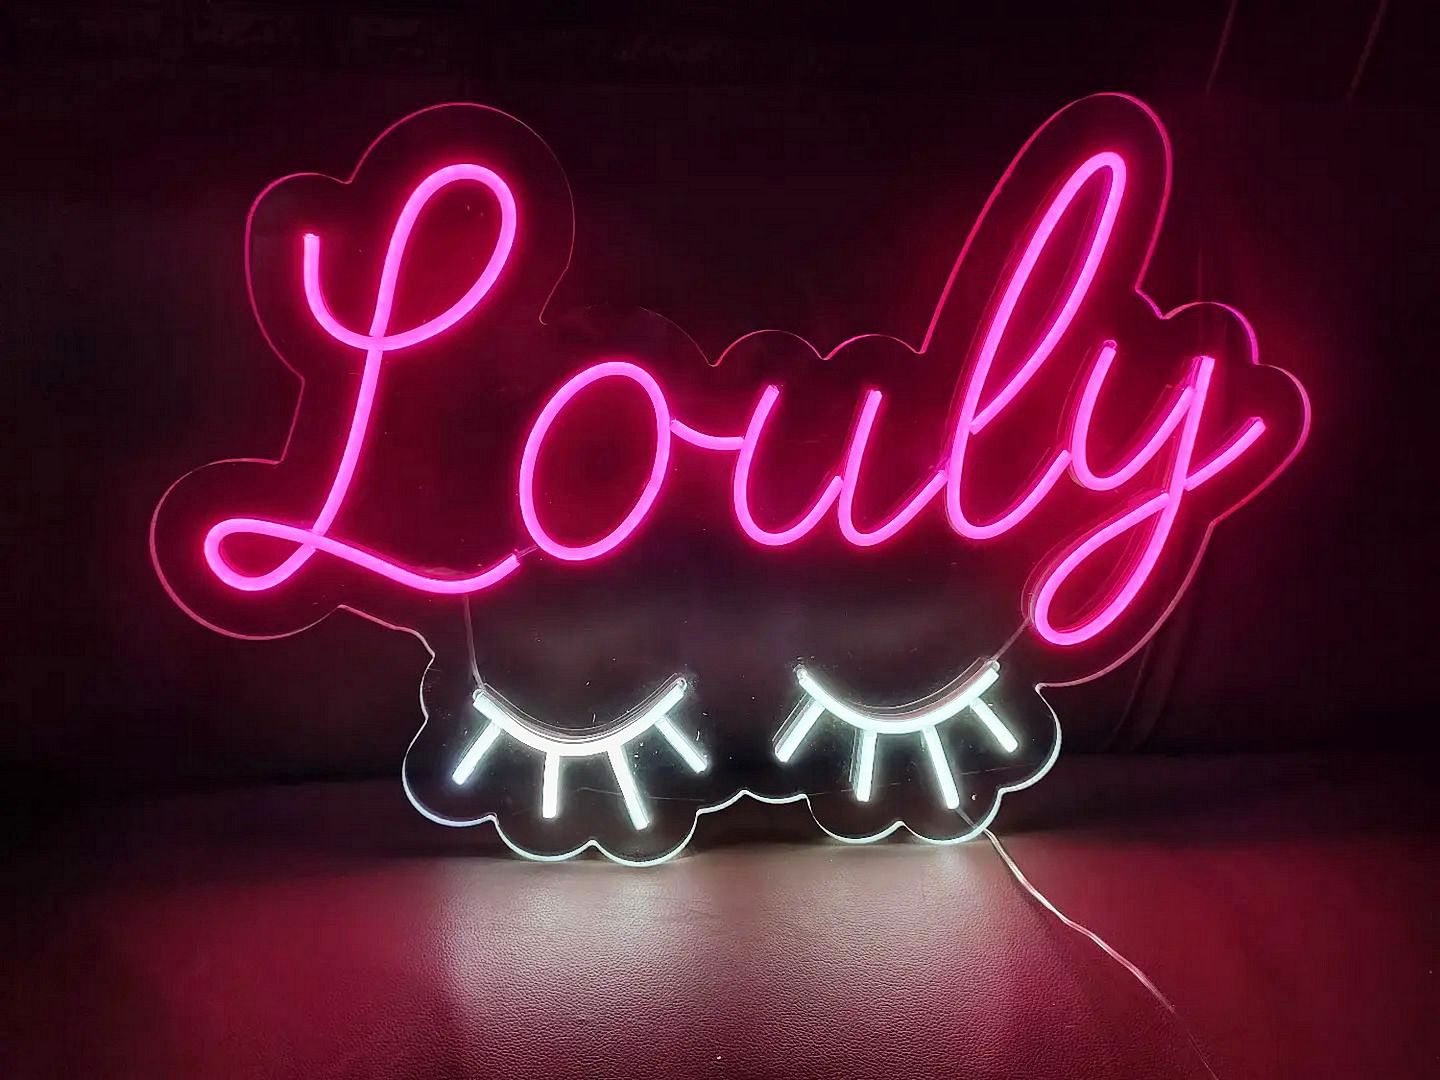 Louly Lashes Neon Sign